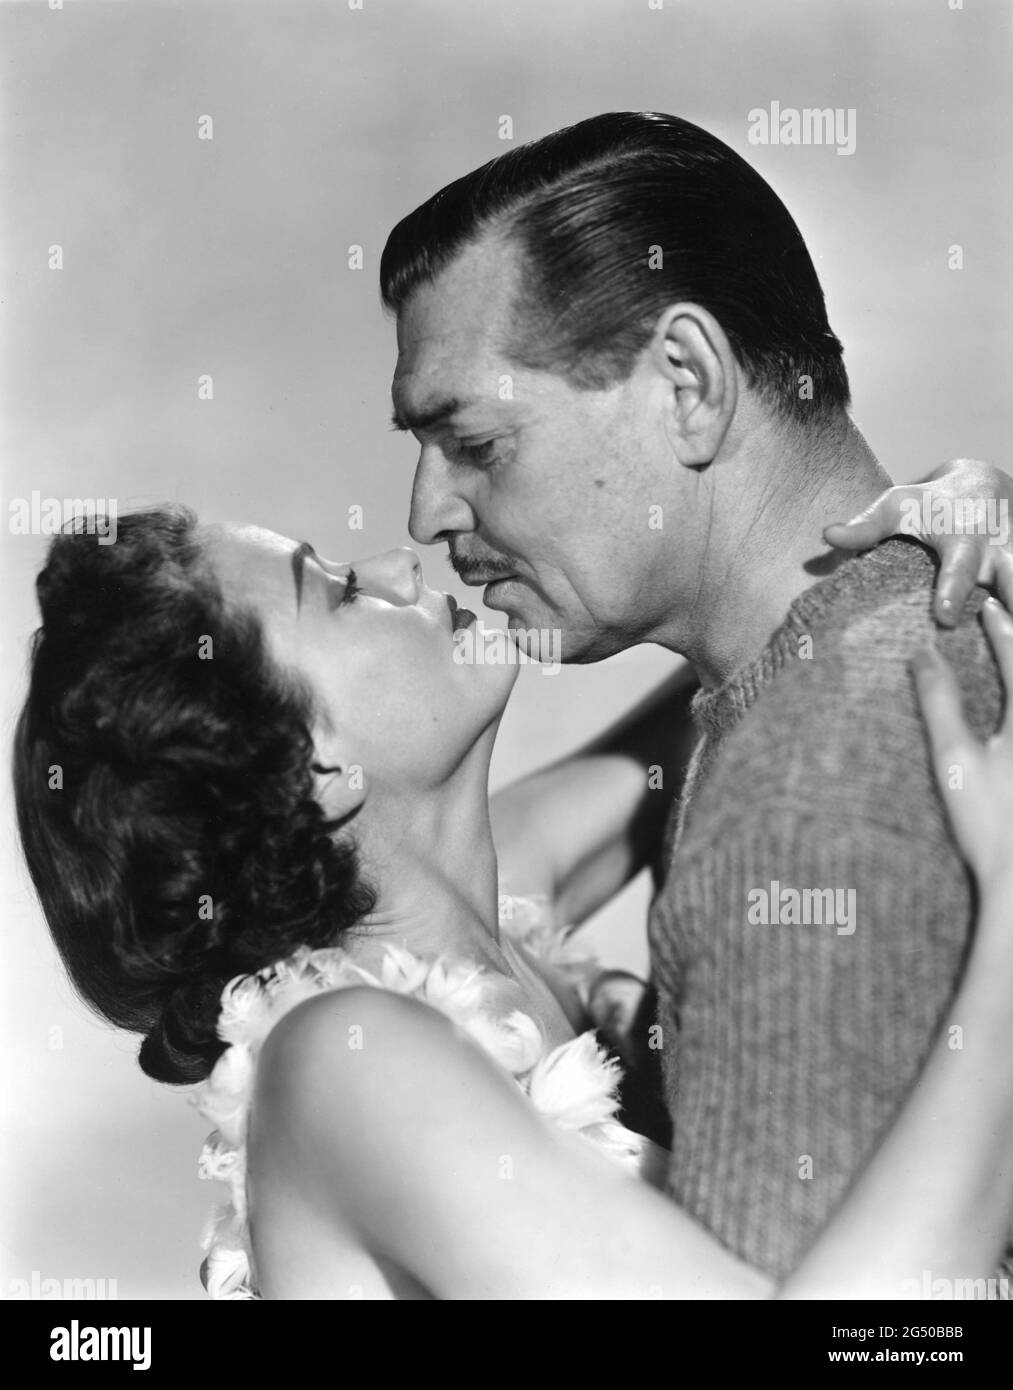 GENE TIERNEY and CLARK GABLE Unretouched Publicity Portrait in NEVER LET ME GO 1953 director DELMER DAVES from novel Come The Dawn by Paul Winterton producer Clarence Brown Metro Goldwyn Mayer Stock Photo